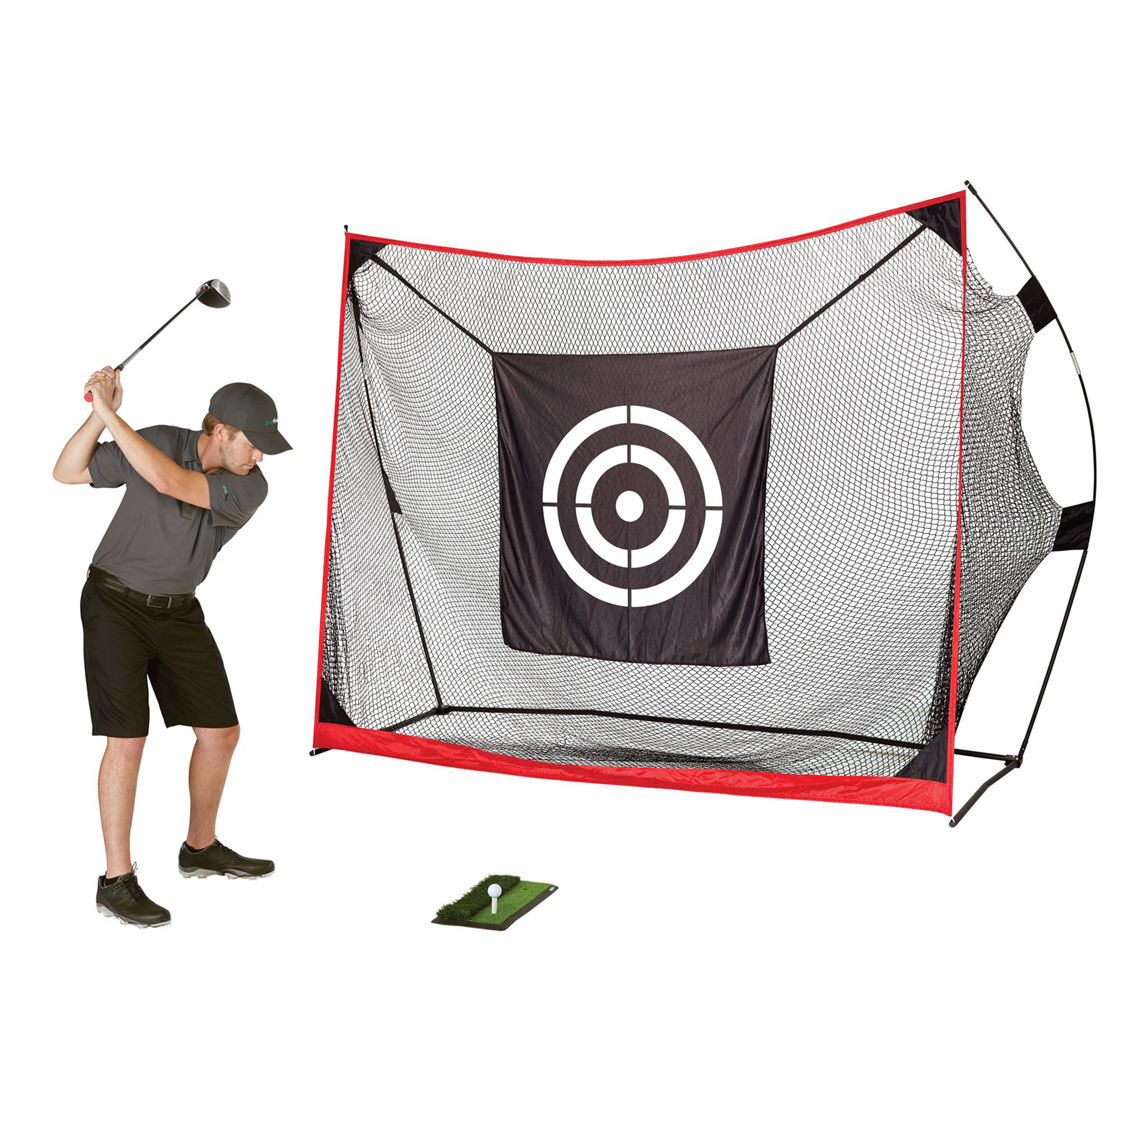 GOLF GIFTS & GALLERY 9FT X 7FT X 3.6FT DELUXE NET - Image 3 of 3